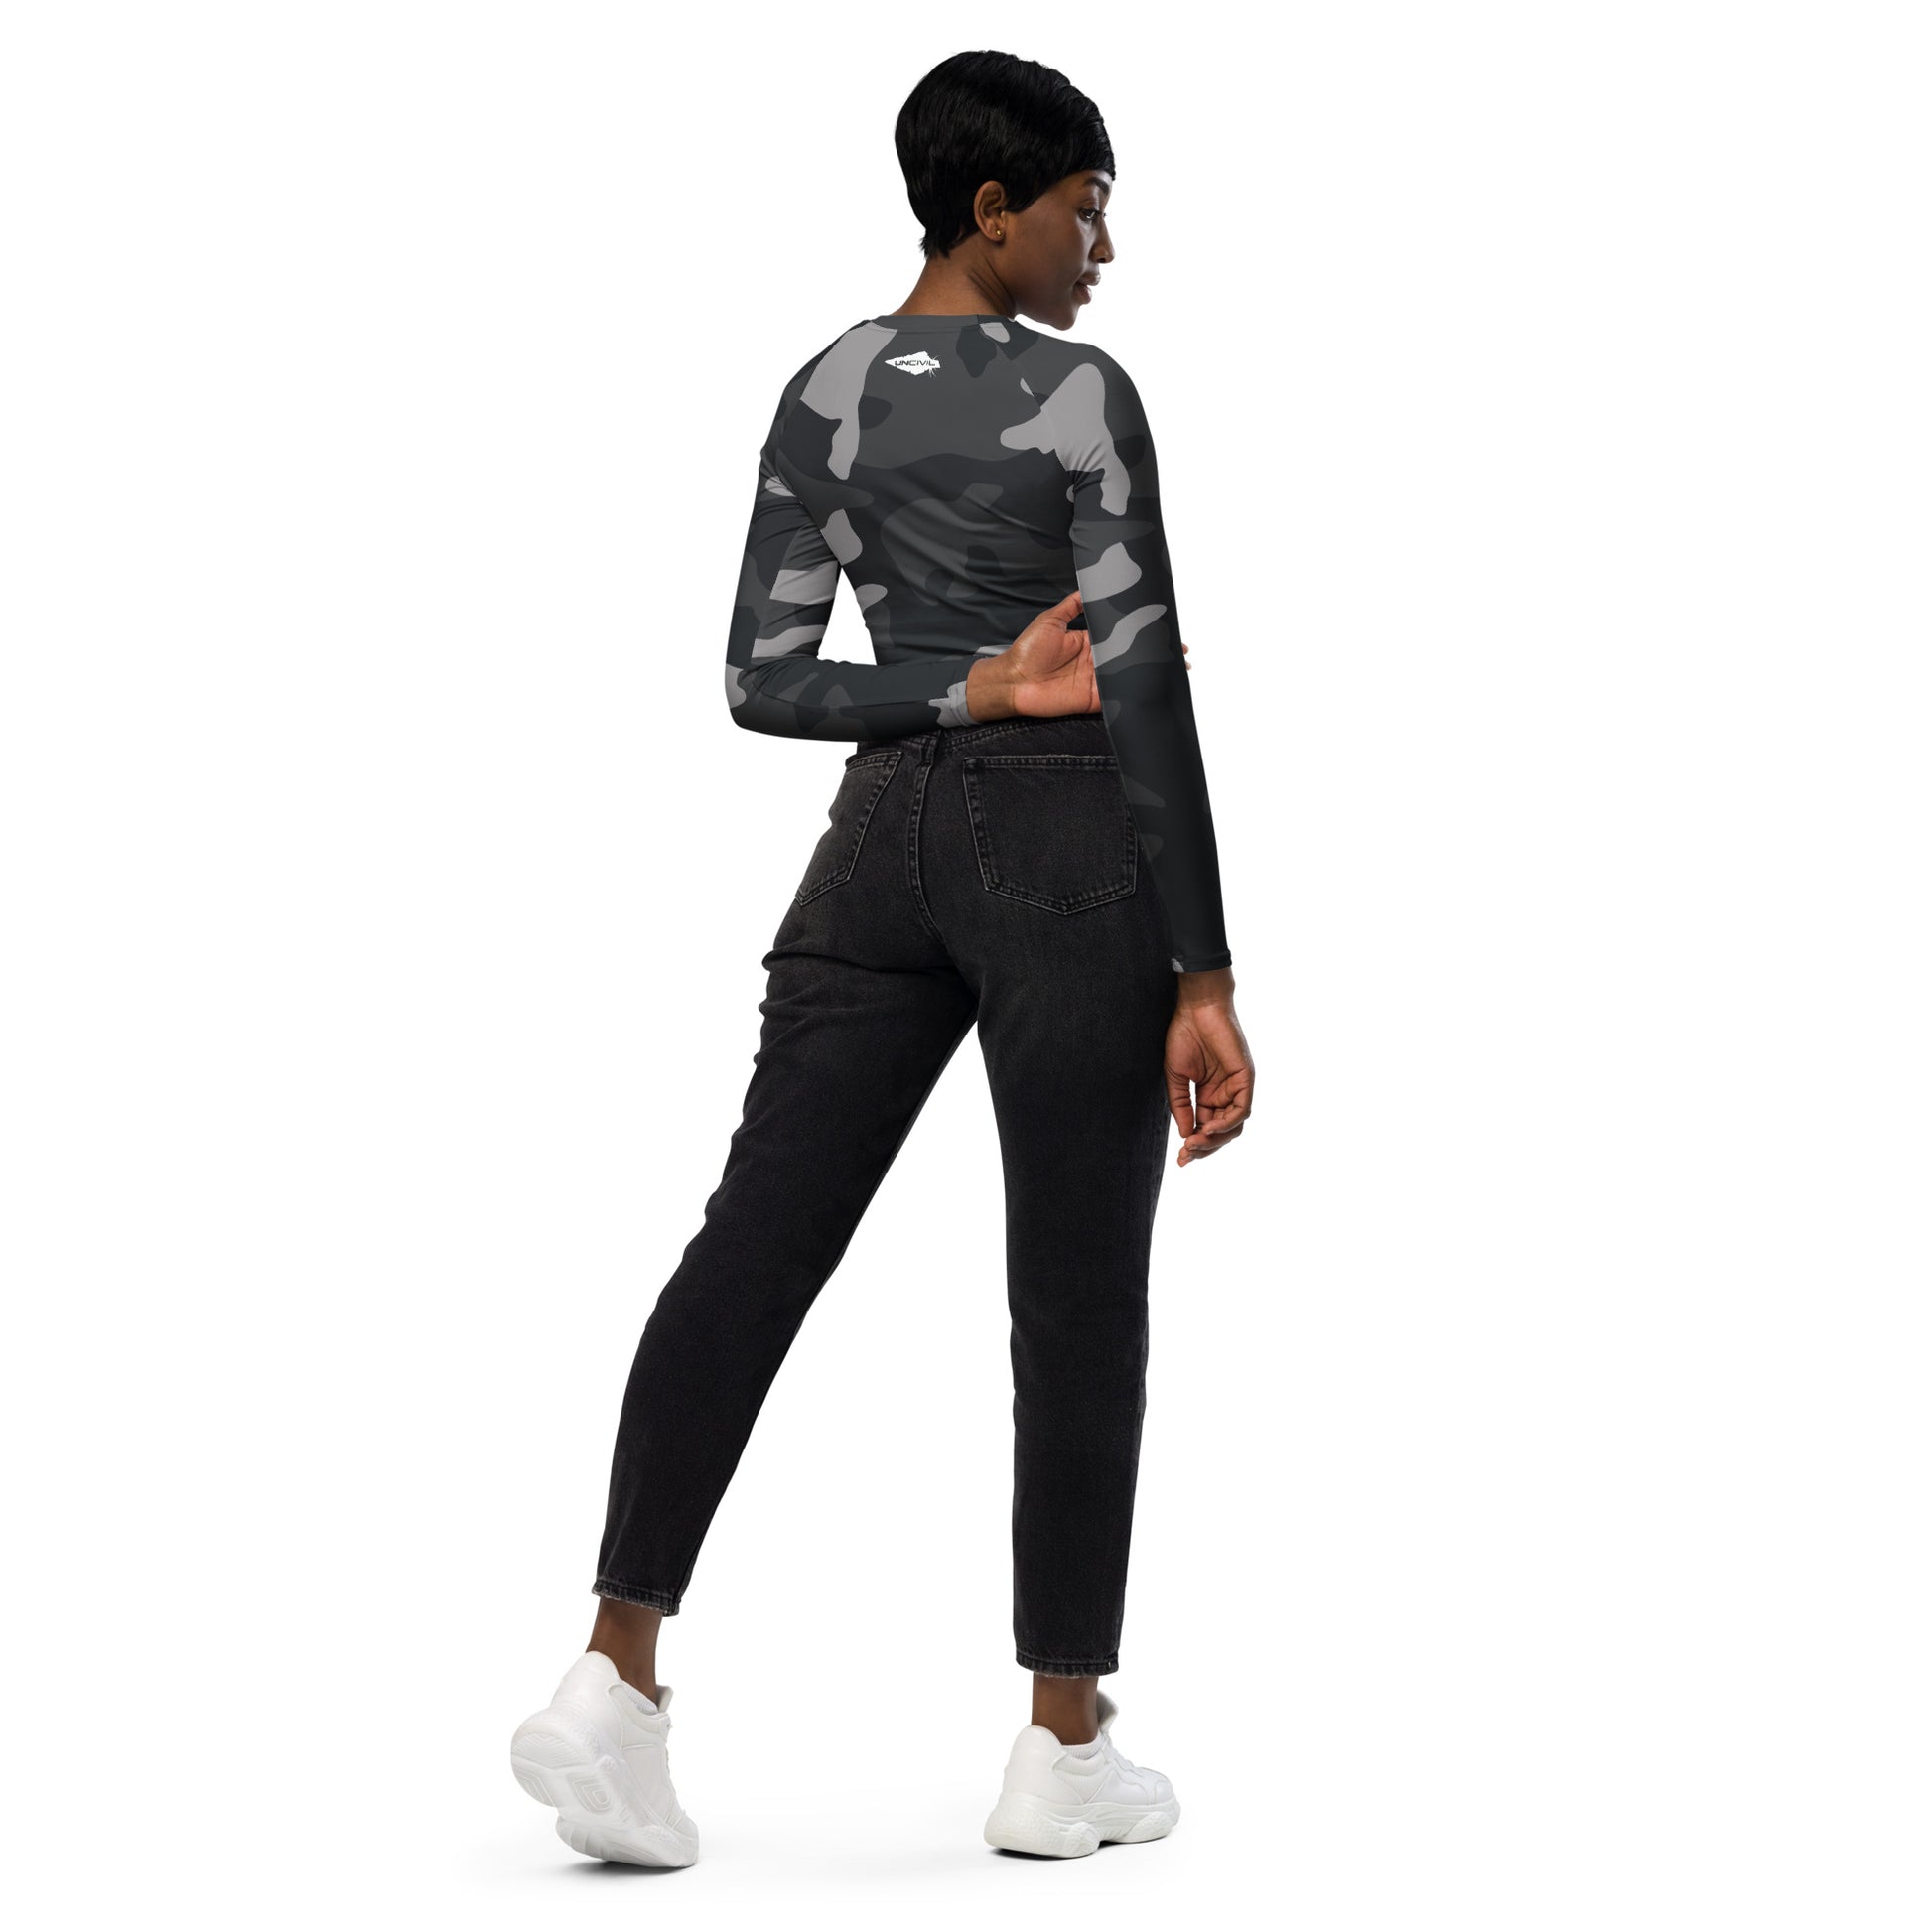 Grey Camo long-sleeve crop top for women is made of recycled polyester and elastane, making it an eco-friendly choice for swimming, sports, or athleisure. Army UPF 50+.